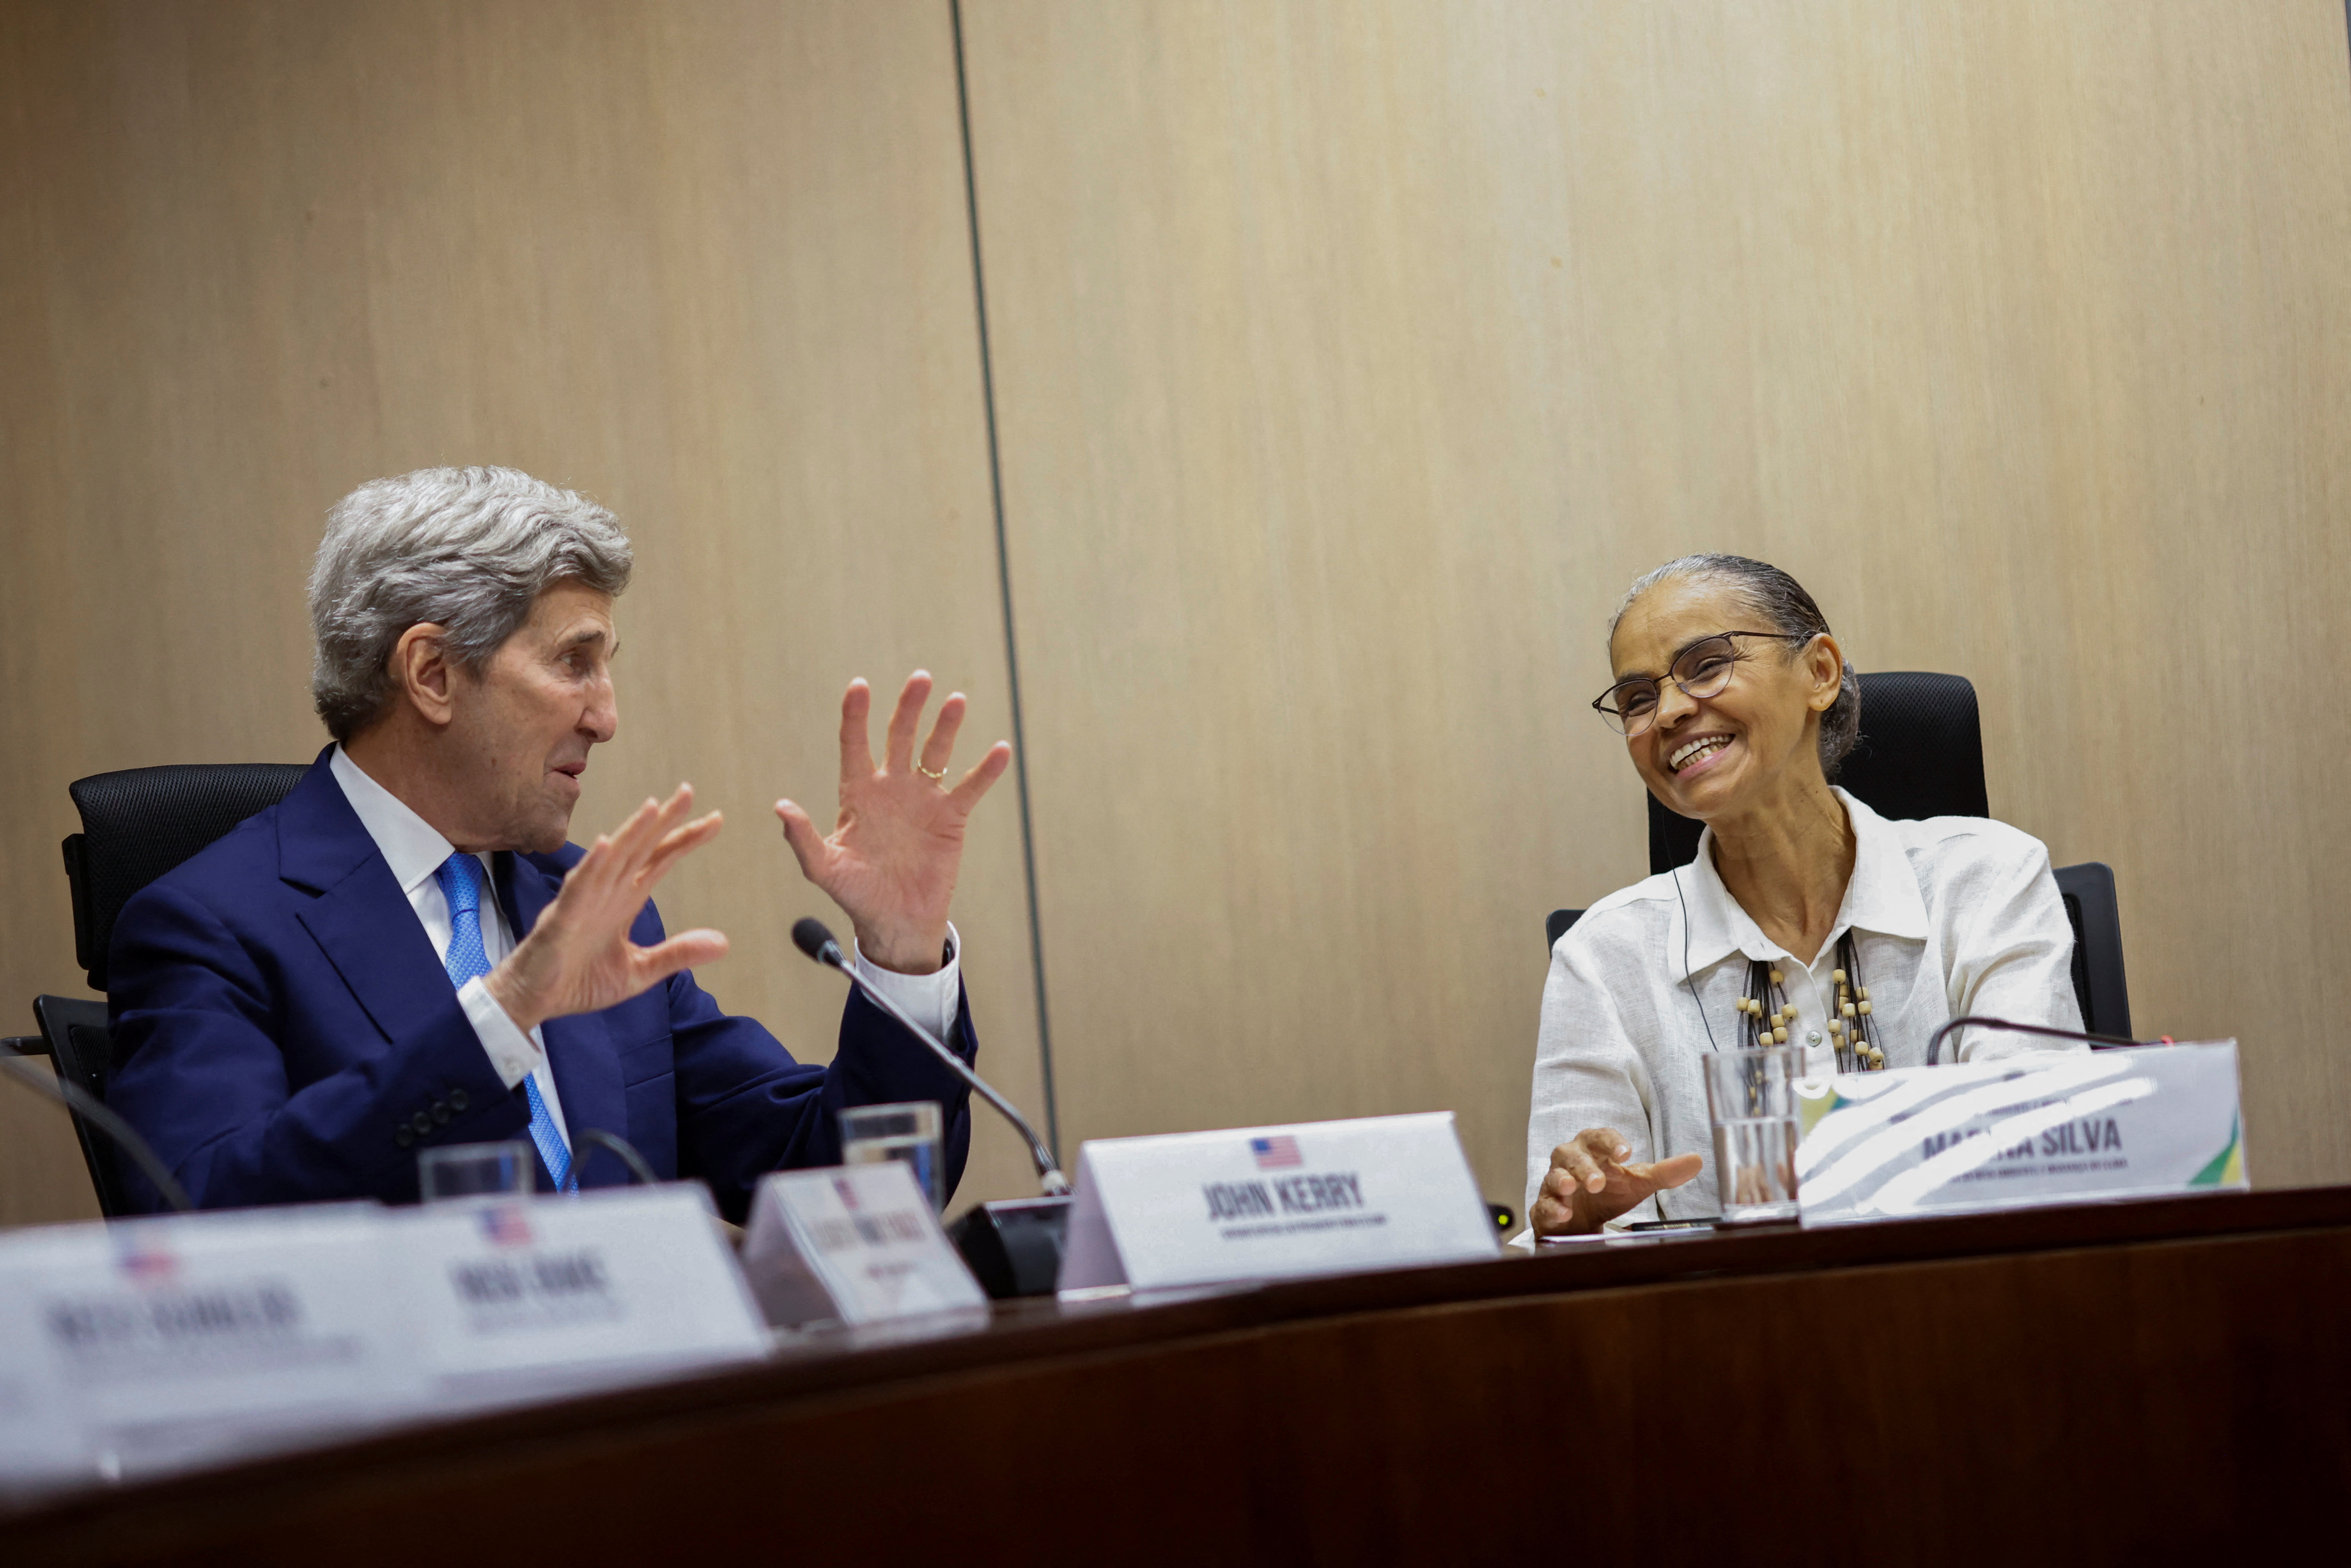 John Kerry, U.S. Special Envoy for Climate, talks with Brazil's Environment Minister Marina Silva during a meeting in Brasilia